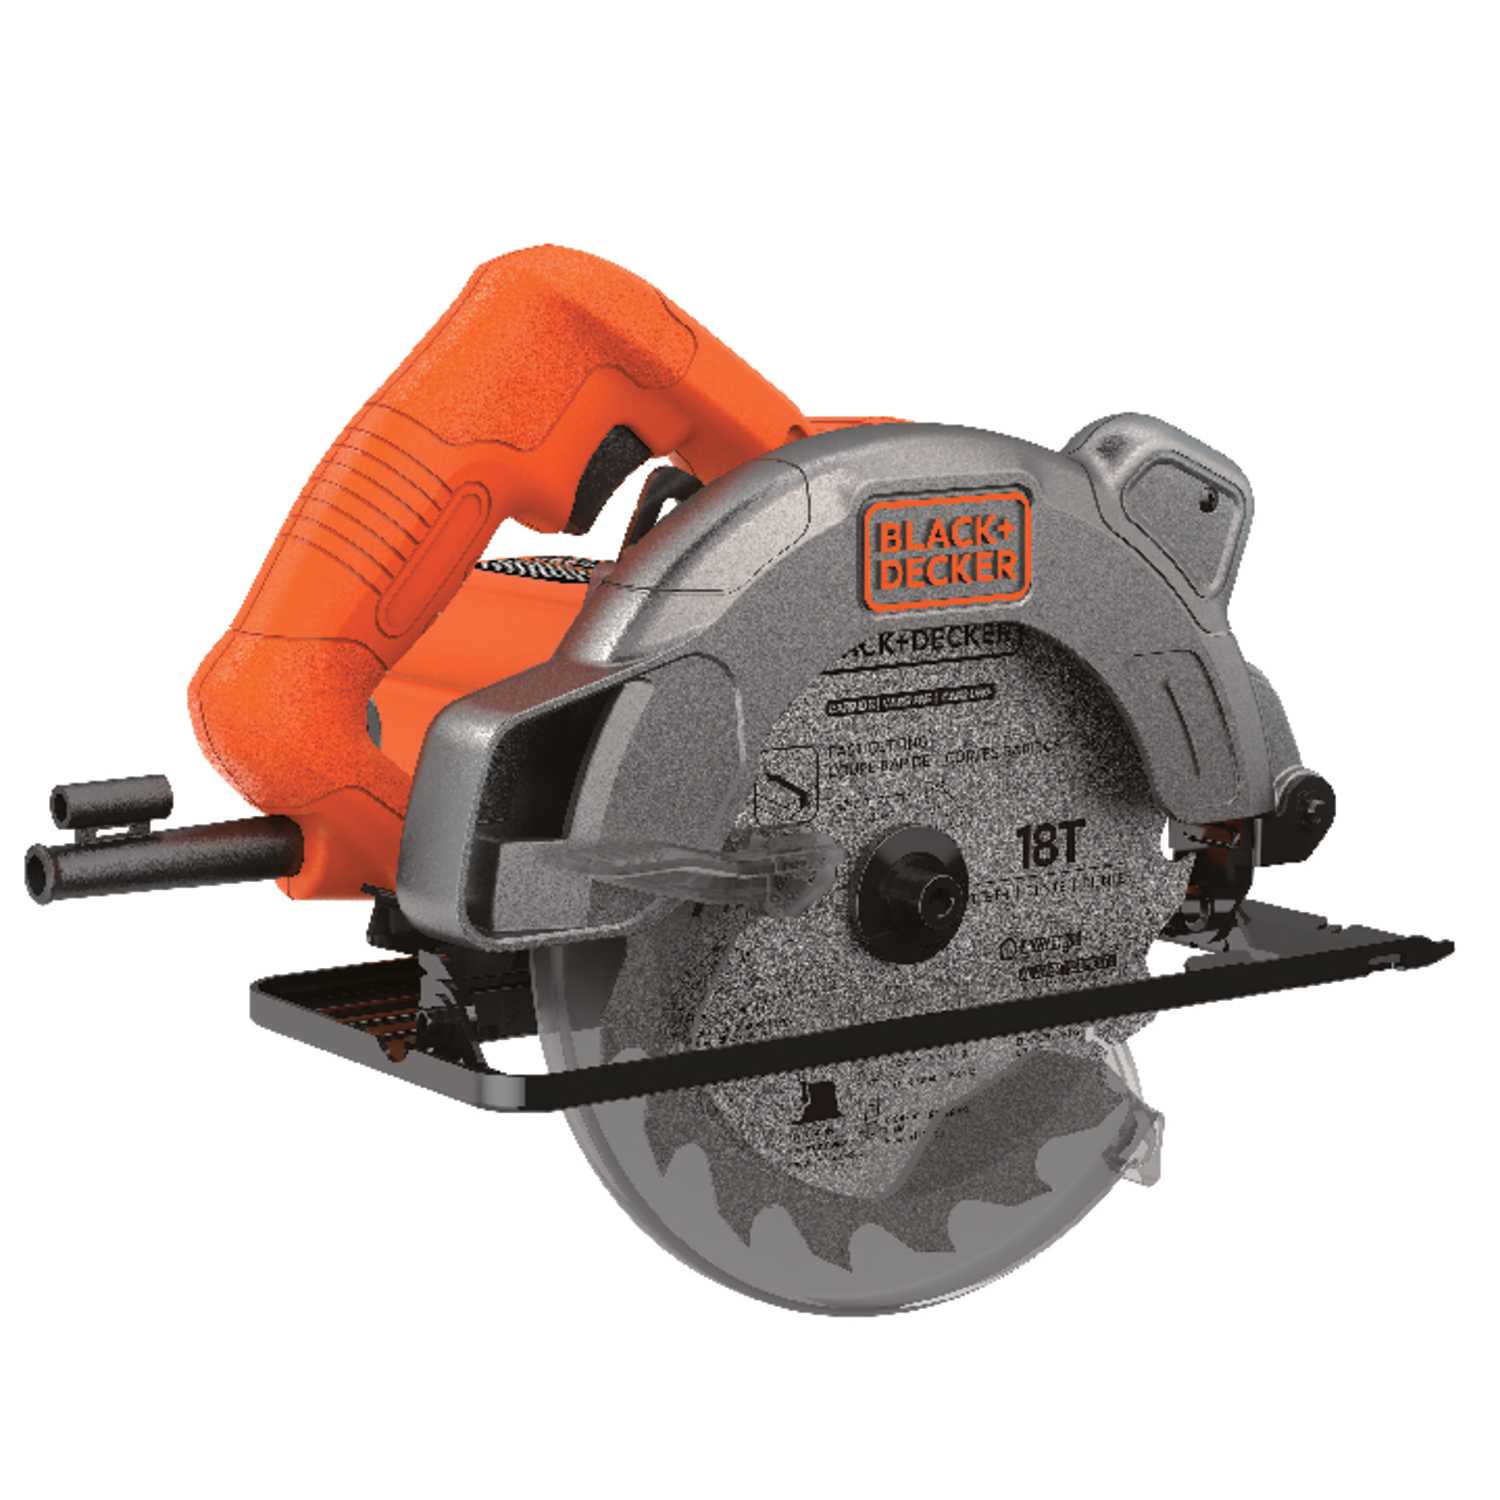 Black and Decker 7-1/4 in. Corded 13 amps Circular Saw with Laser Bare Tool 3000 rpm